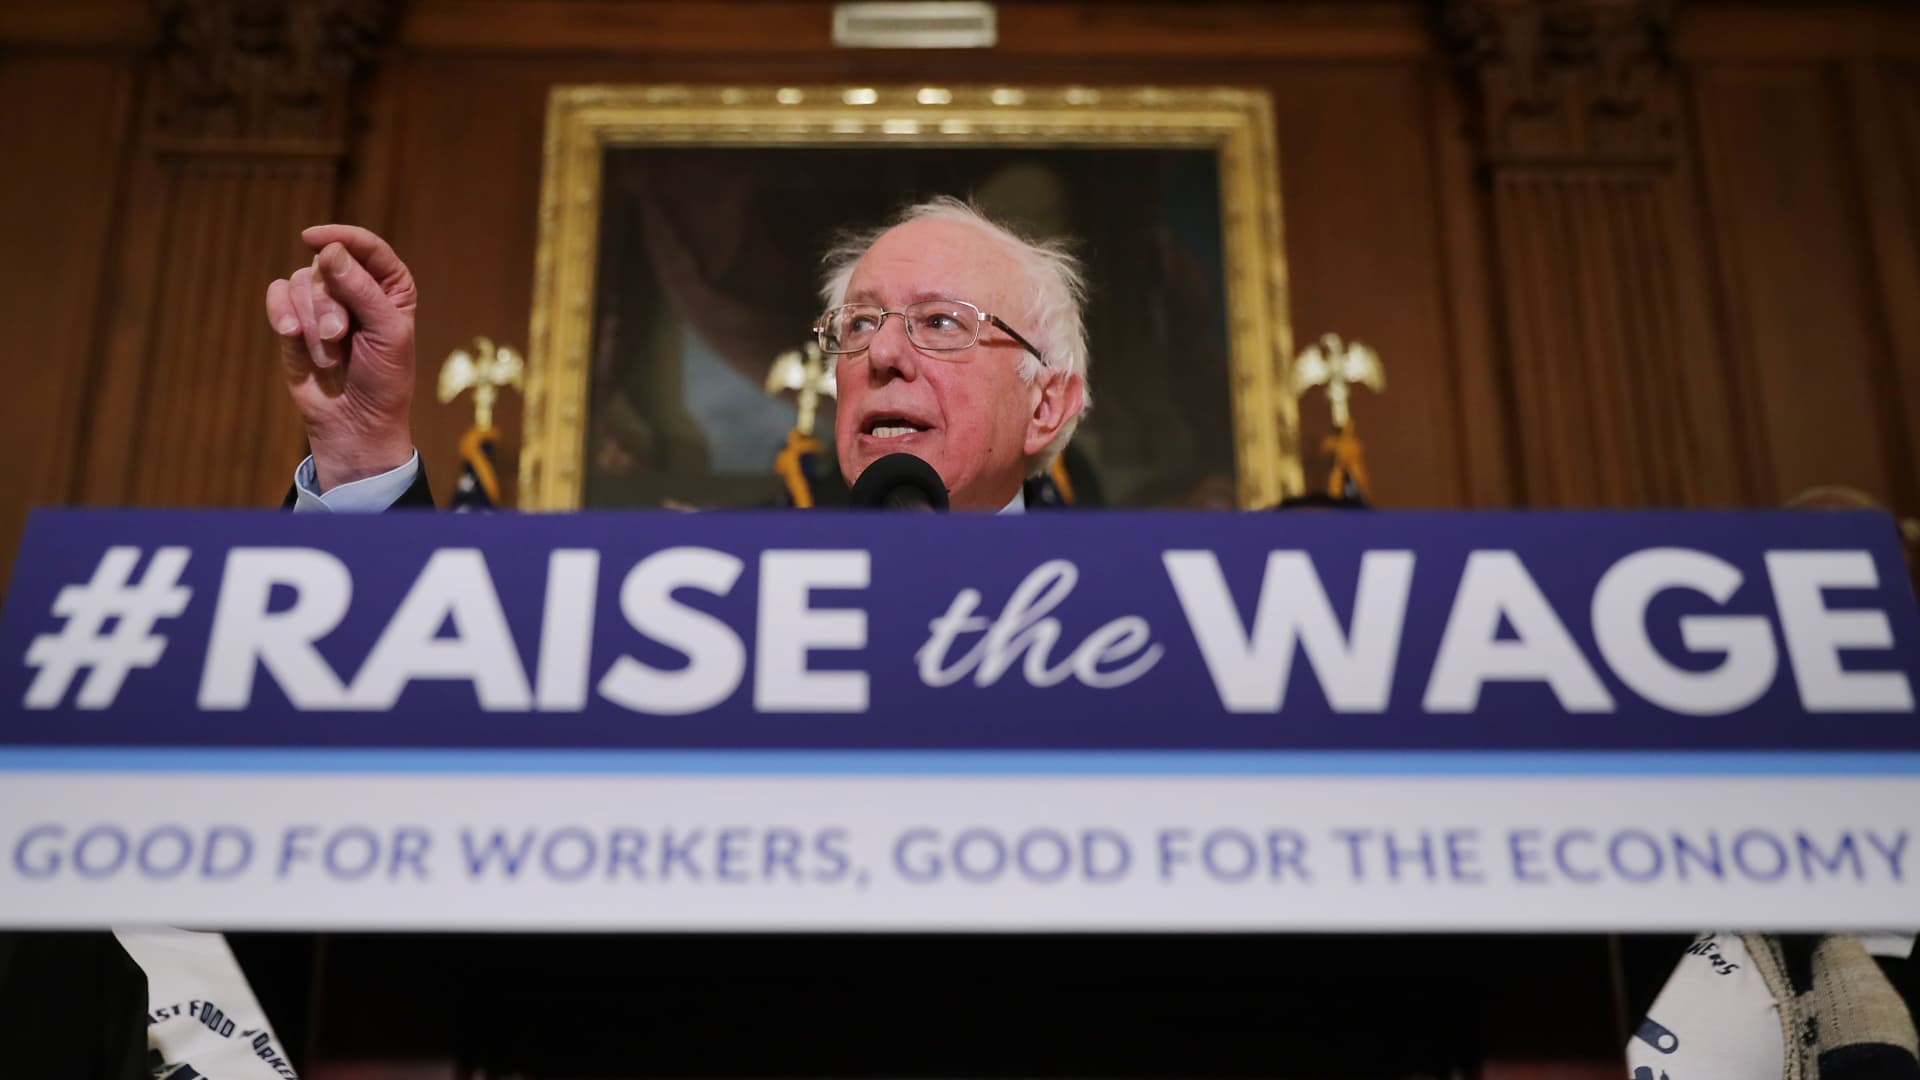 Sen. Bernie Sanders, I-Vt., speaks during an event to introduce the Raise The Wage Act at the U.S. Capitol on Jan. 16, 2019.